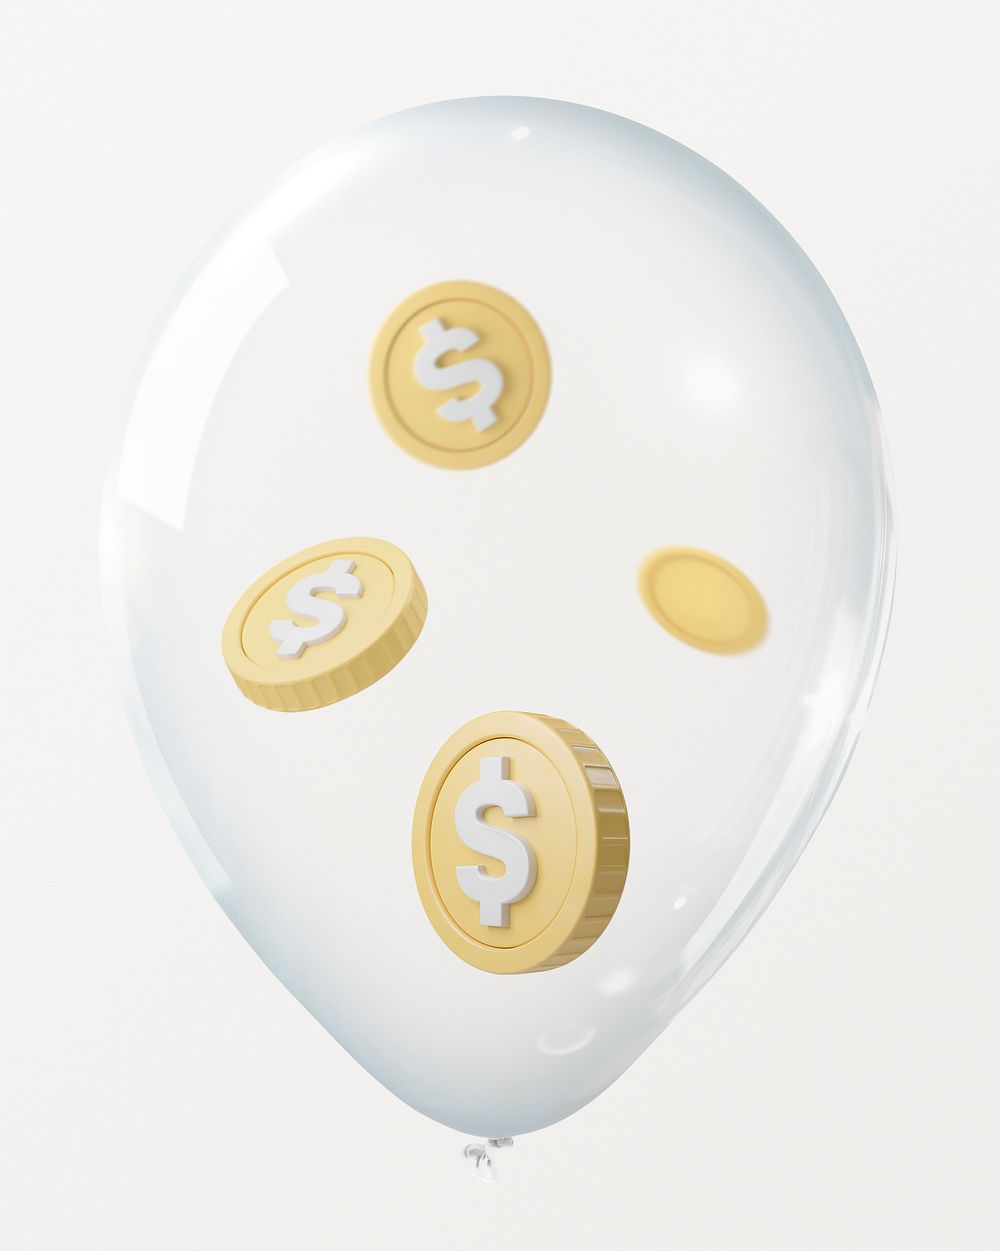 Financial insurance, floating coins in clear balloon